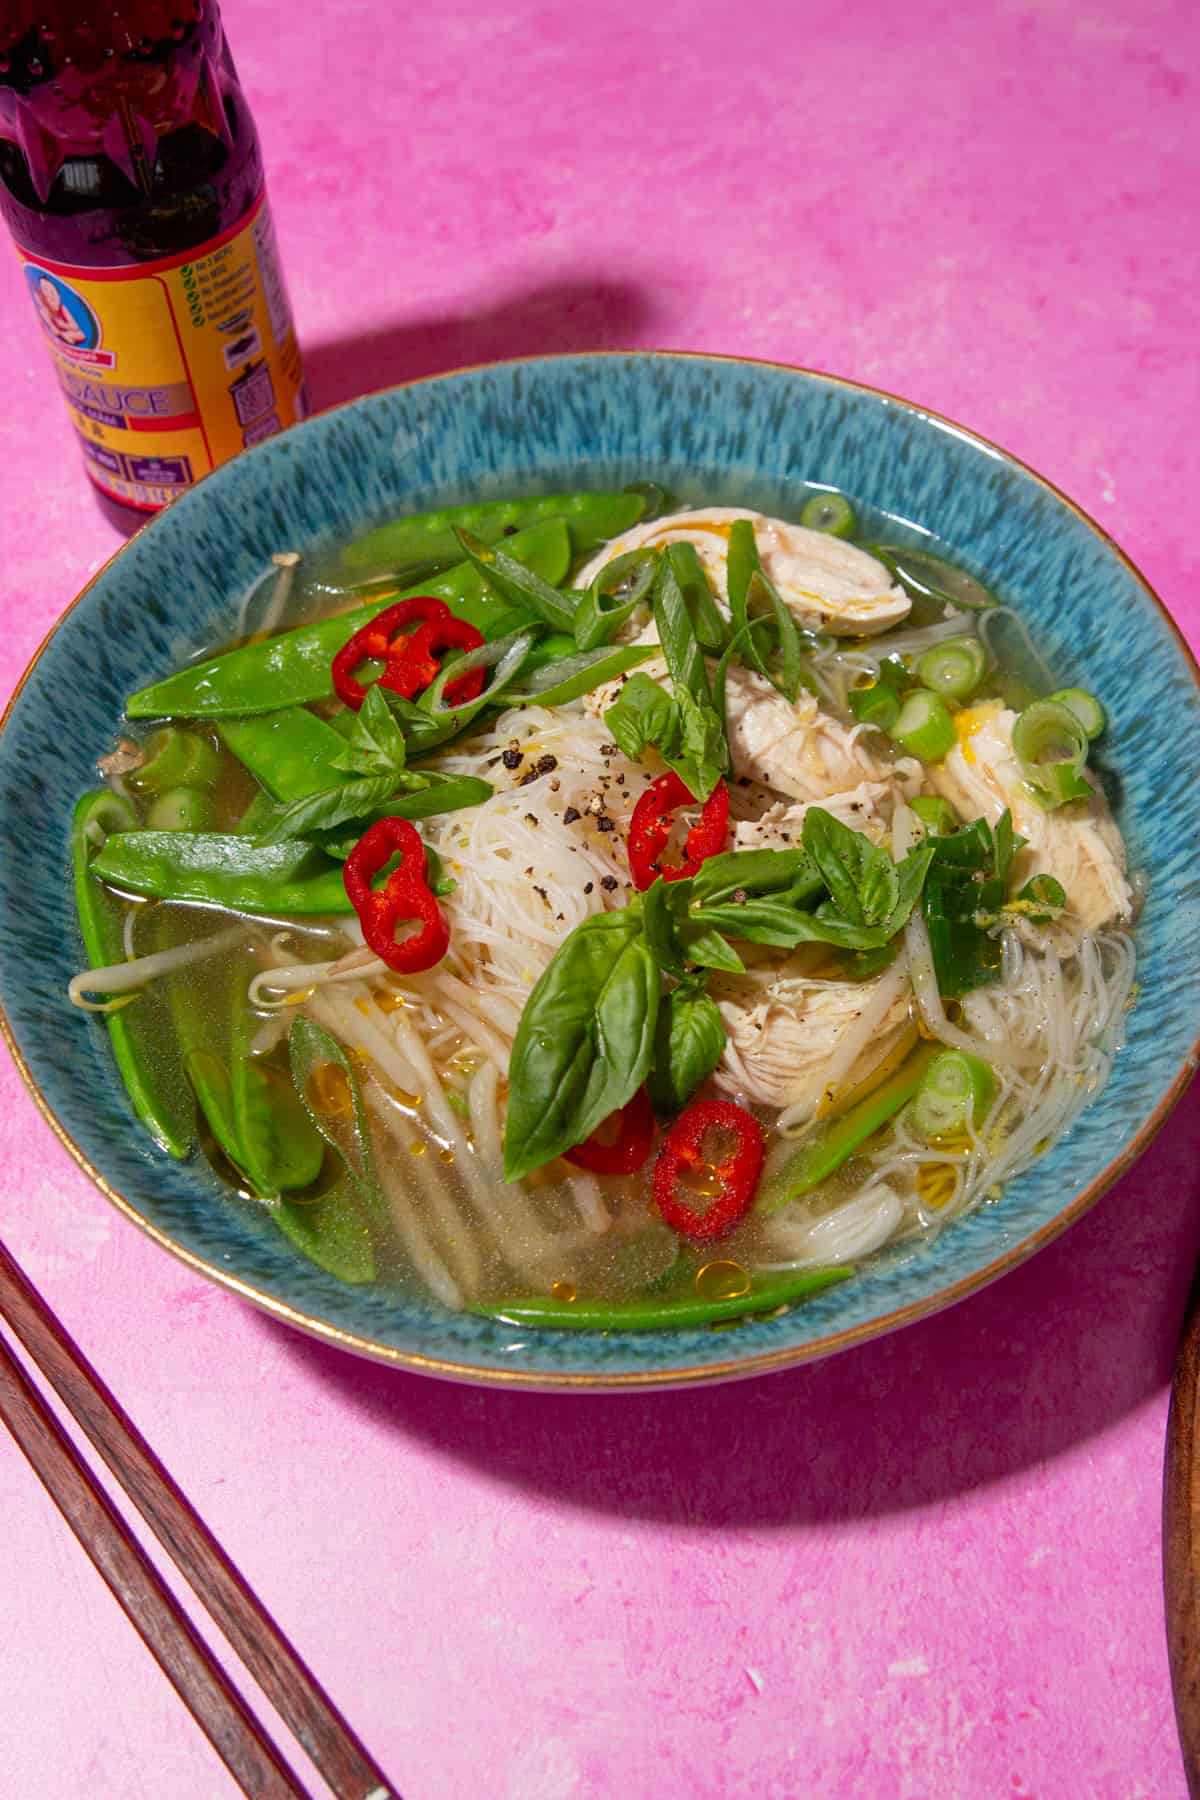 Chicken soup with noodles, mange tout, chillies and spring onions in a blue bowl on a pink background with a bottle of fish sauce behind the dish and chop sticks towards the front.